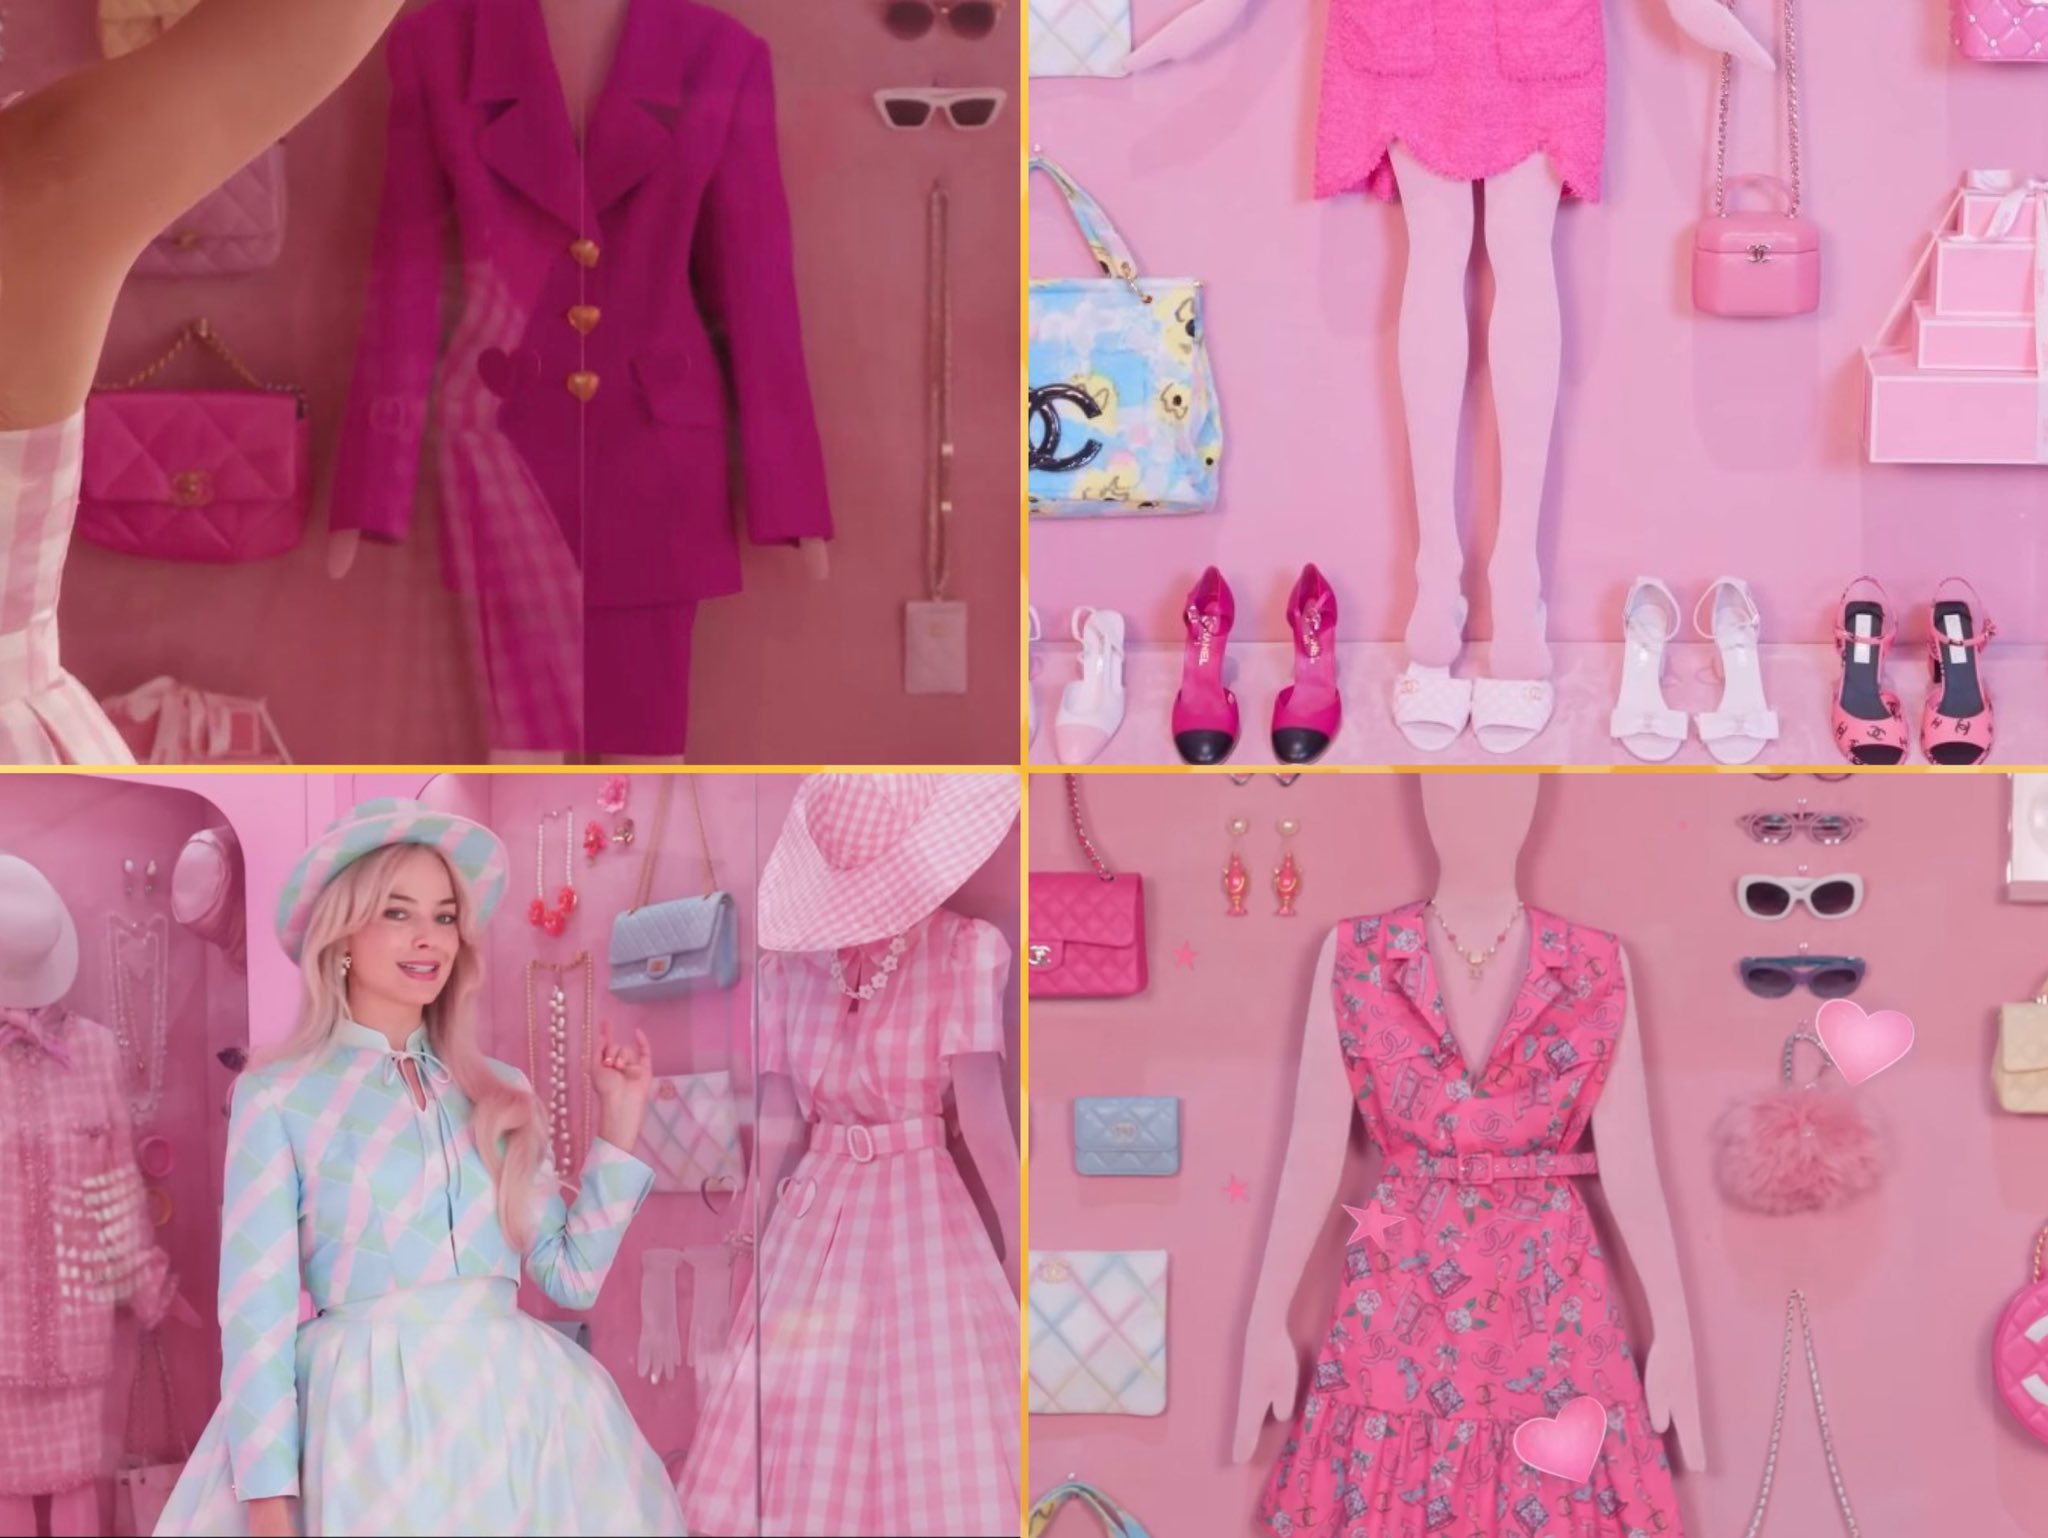 Buzzing Pop on X: The wardrobe from the upcoming #Barbie film is